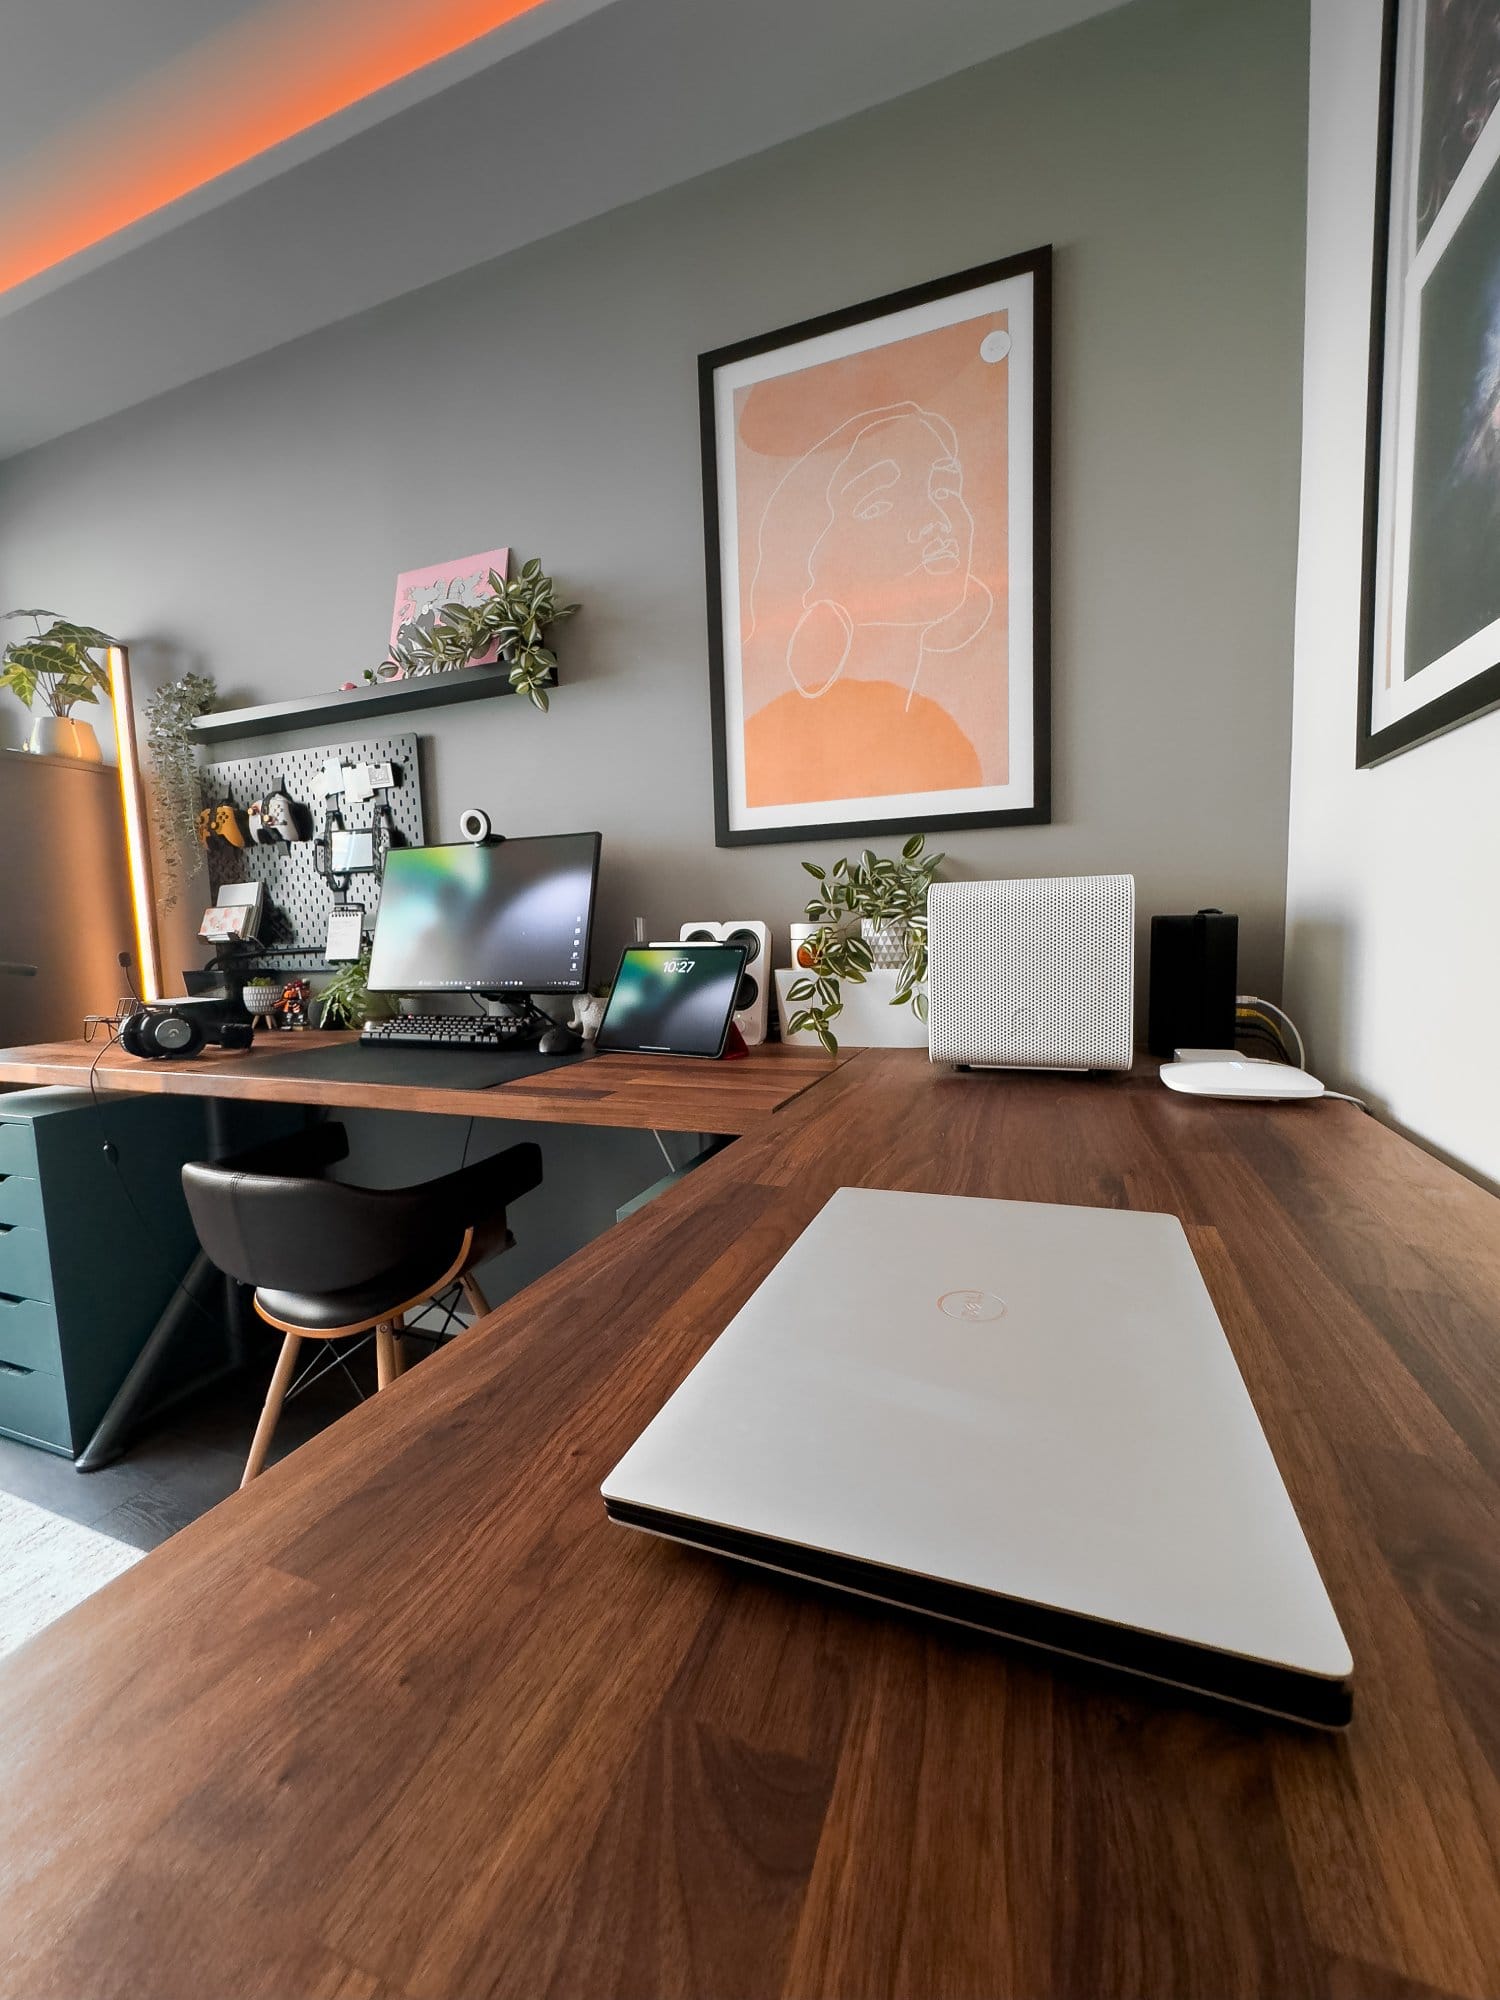 A modern home office setup featuring a Dell XPS 15 9570 laptop on a wooden IKEA KARLBY desk, with a Dell monitor, Razer Kiyo webcam, Logitech G Pro keyboard and mouse, an iPad Pro 12.9 (3rd Gen), and Logitech G Pro X headphones, complemented by plants and framed artwork on the walls